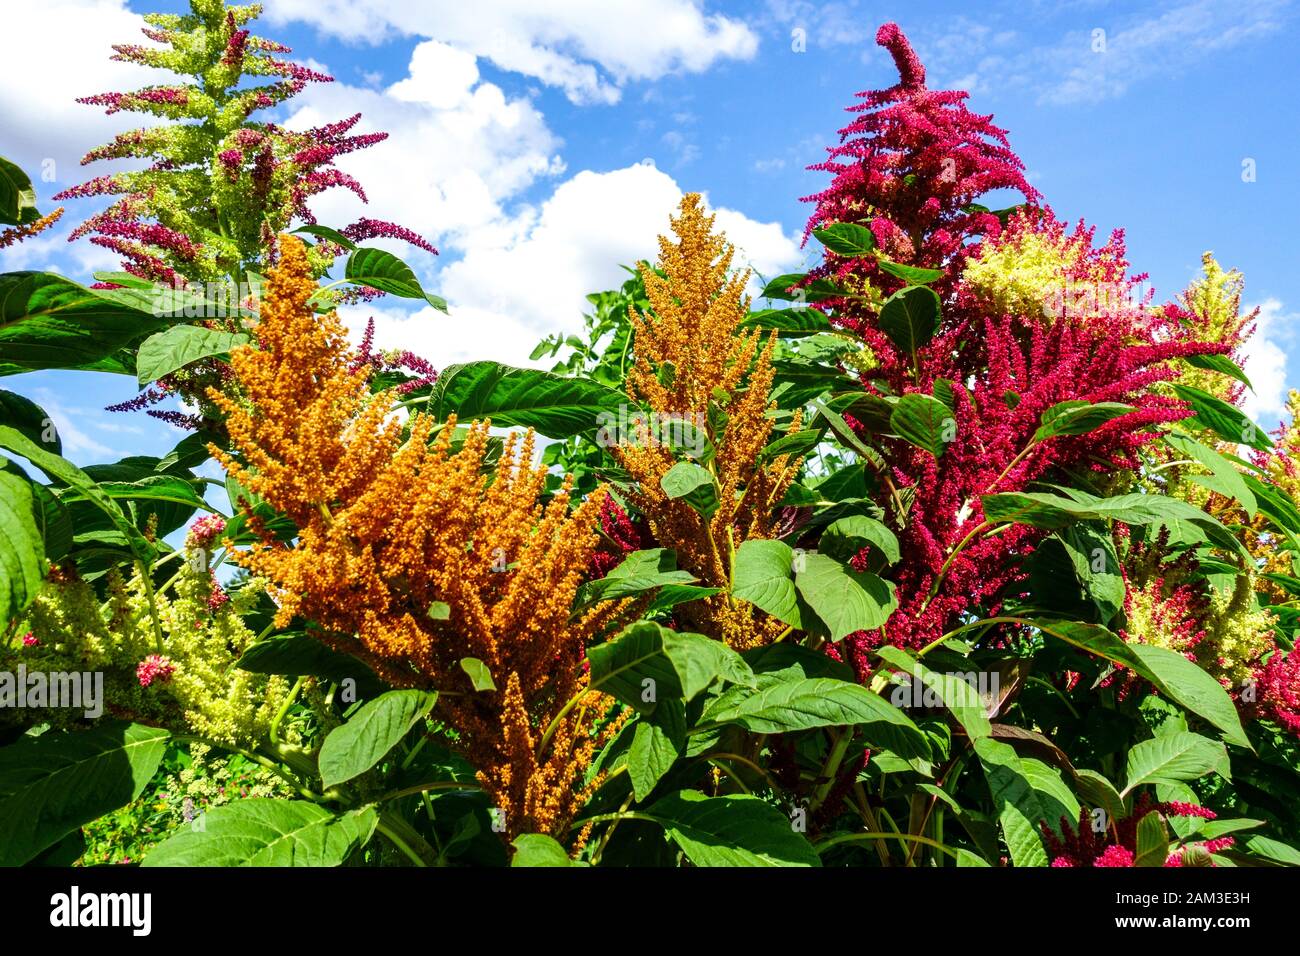 Pseudo-cereal domesticated plant Amaranth flowers, the amaranth plant originally comes from Central America Stock Photo